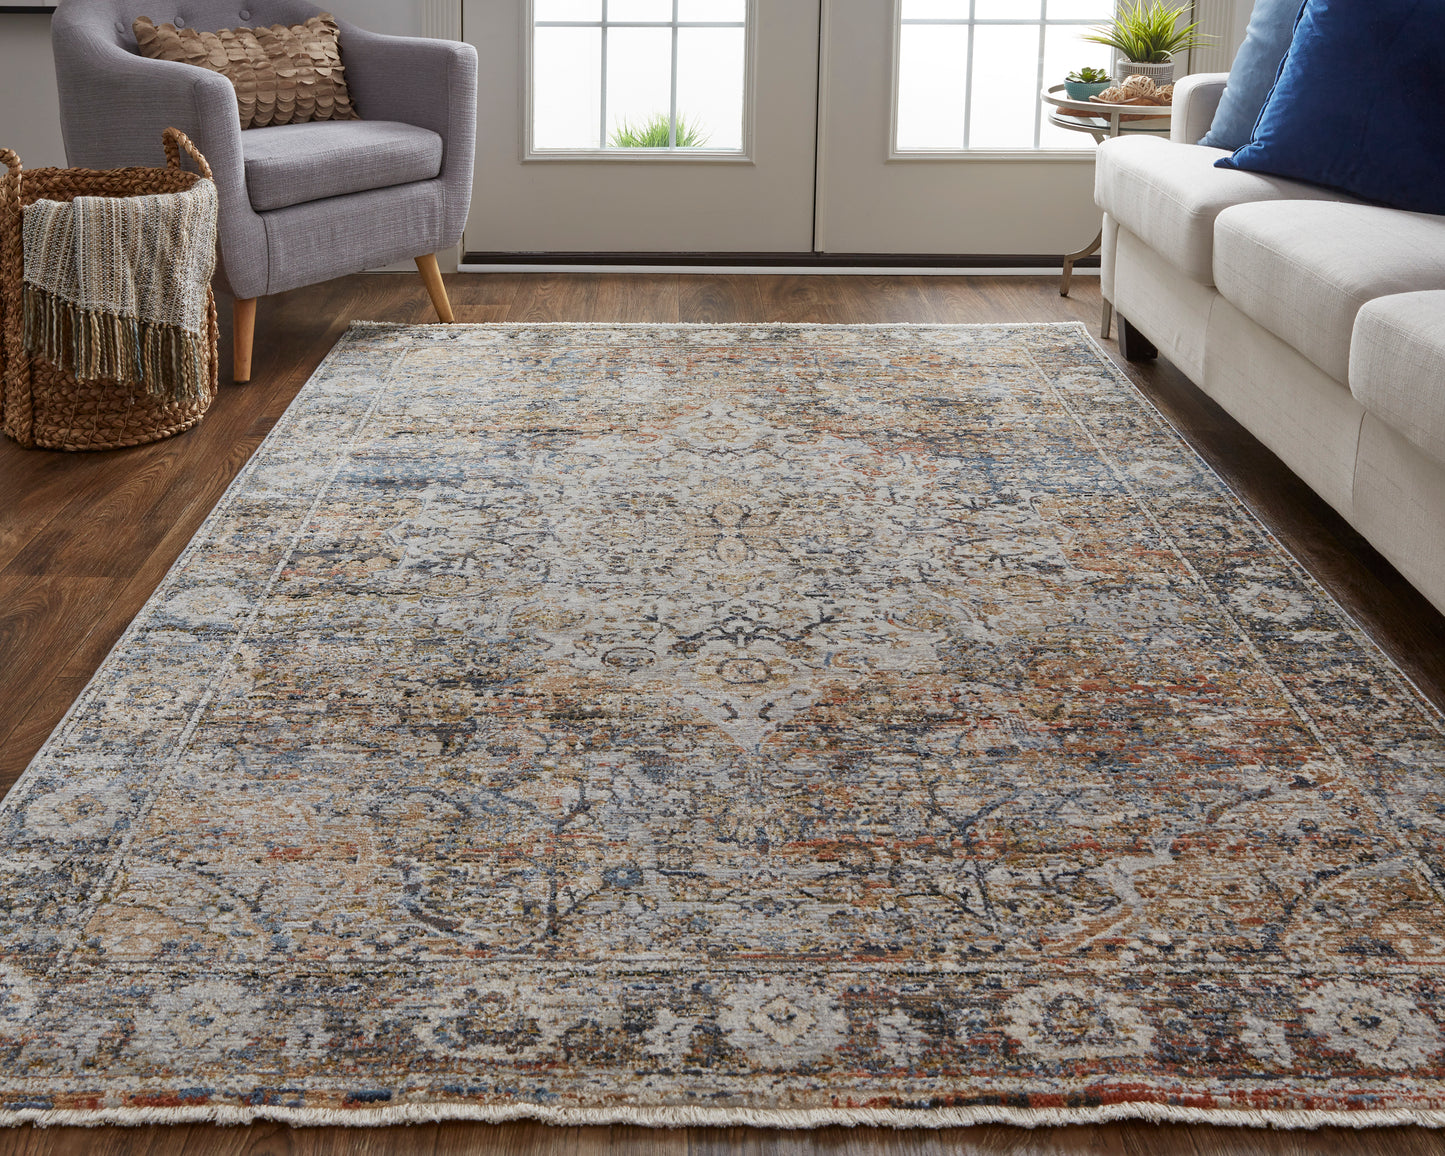 Kaia 39GMF Power Loomed Synthetic Blend Indoor Area Rug by Feizy Rugs